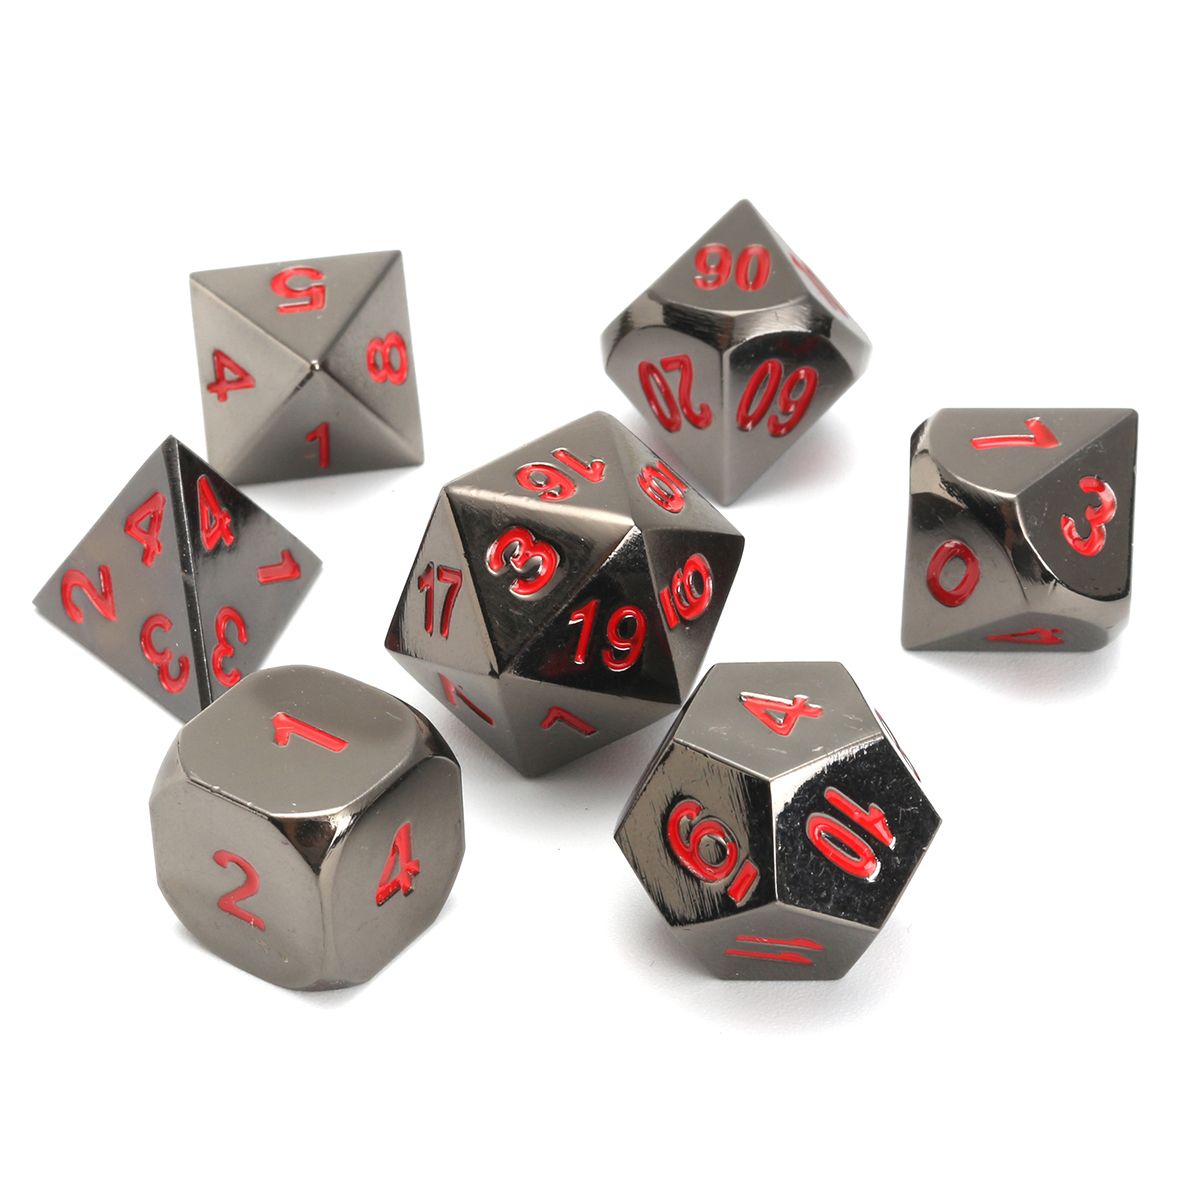 New-Metal-Polyhedral-Dice-with-Bag-Green-Red-7-Piece-Metal-Set-DnD-RPG-1239419